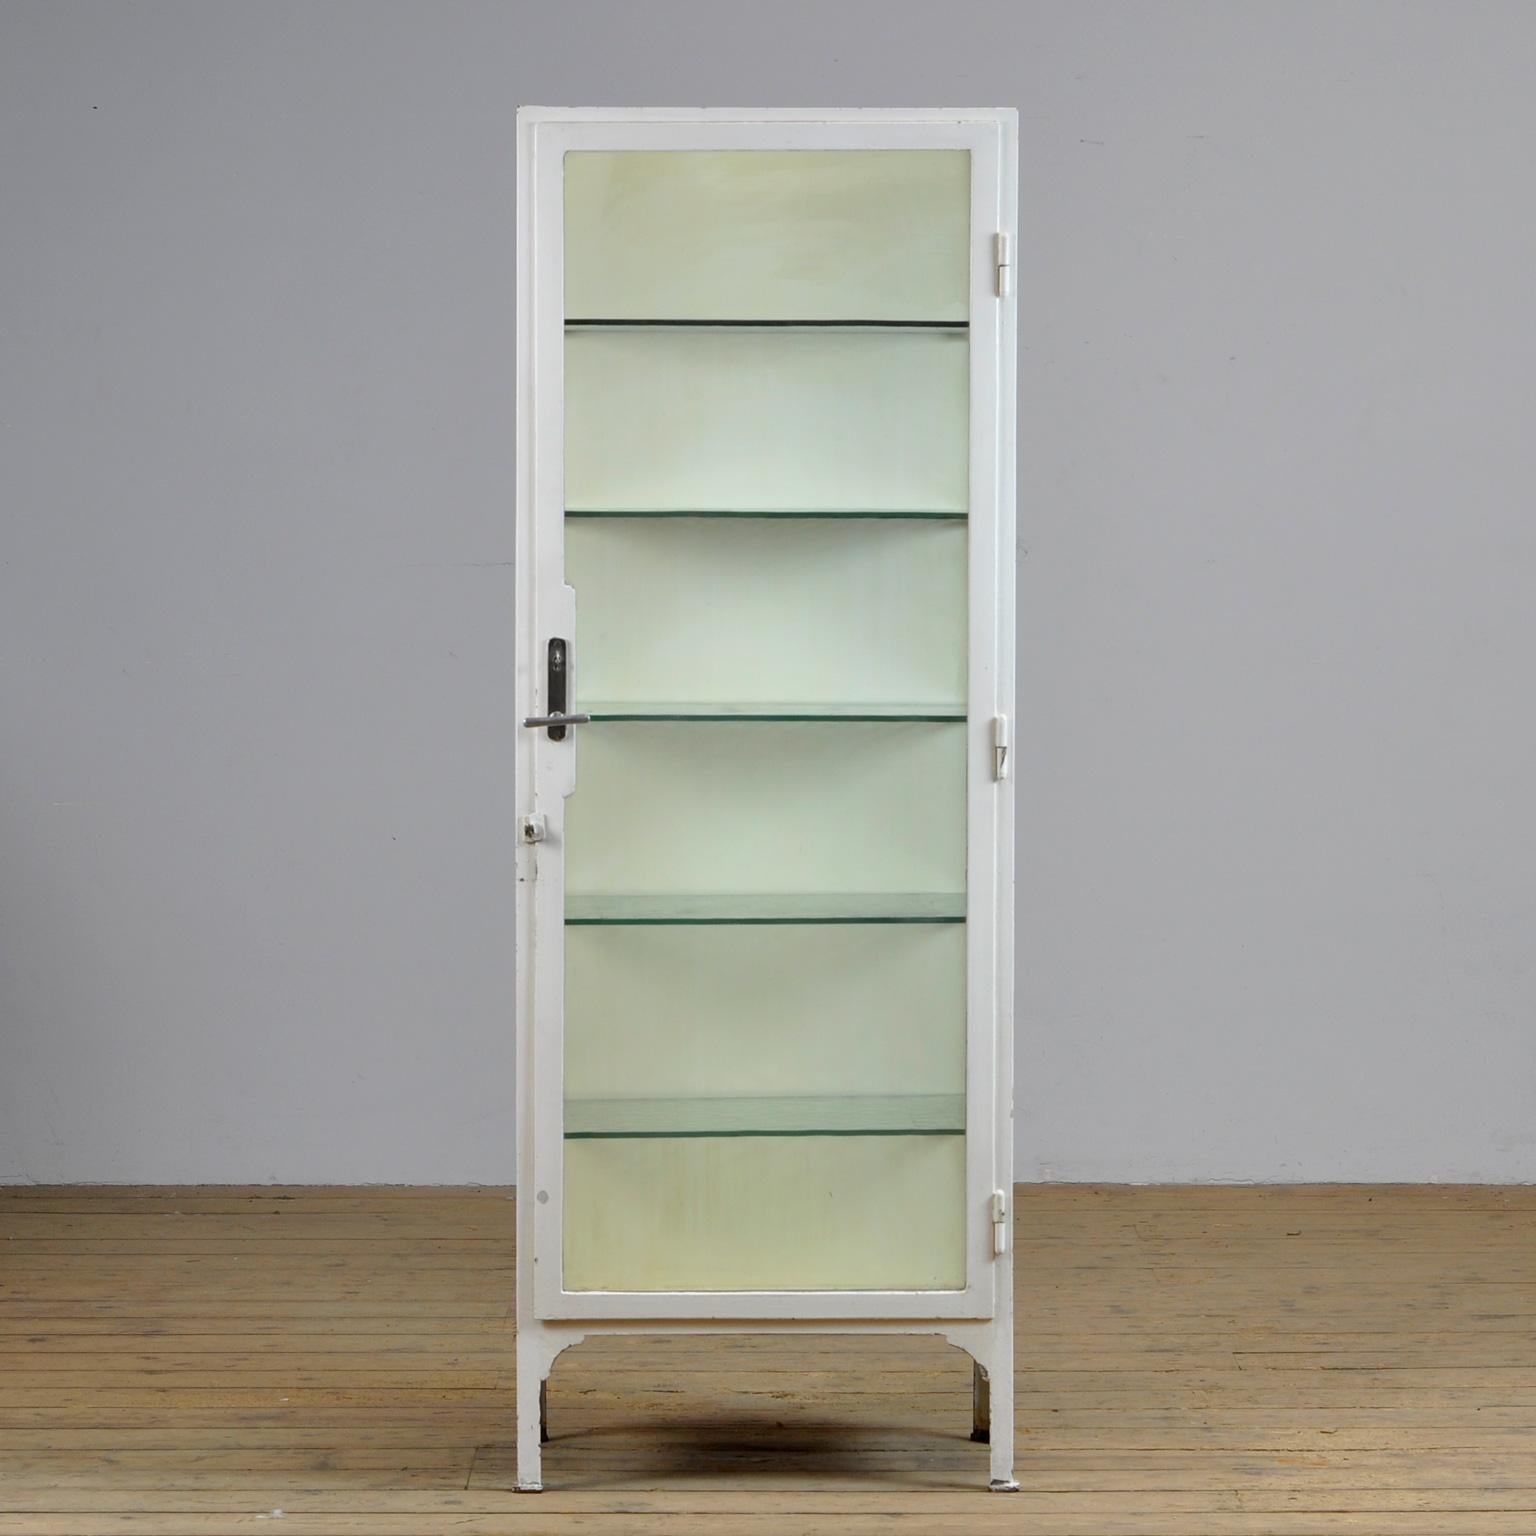 Medical cabinet from the 1930s. The cabinet is produced in hungary and is made of thick iron and antique glass. With the original glass shelves of 8mm thick. The glass plates have a green tint. The lock and handle are also original and functional.